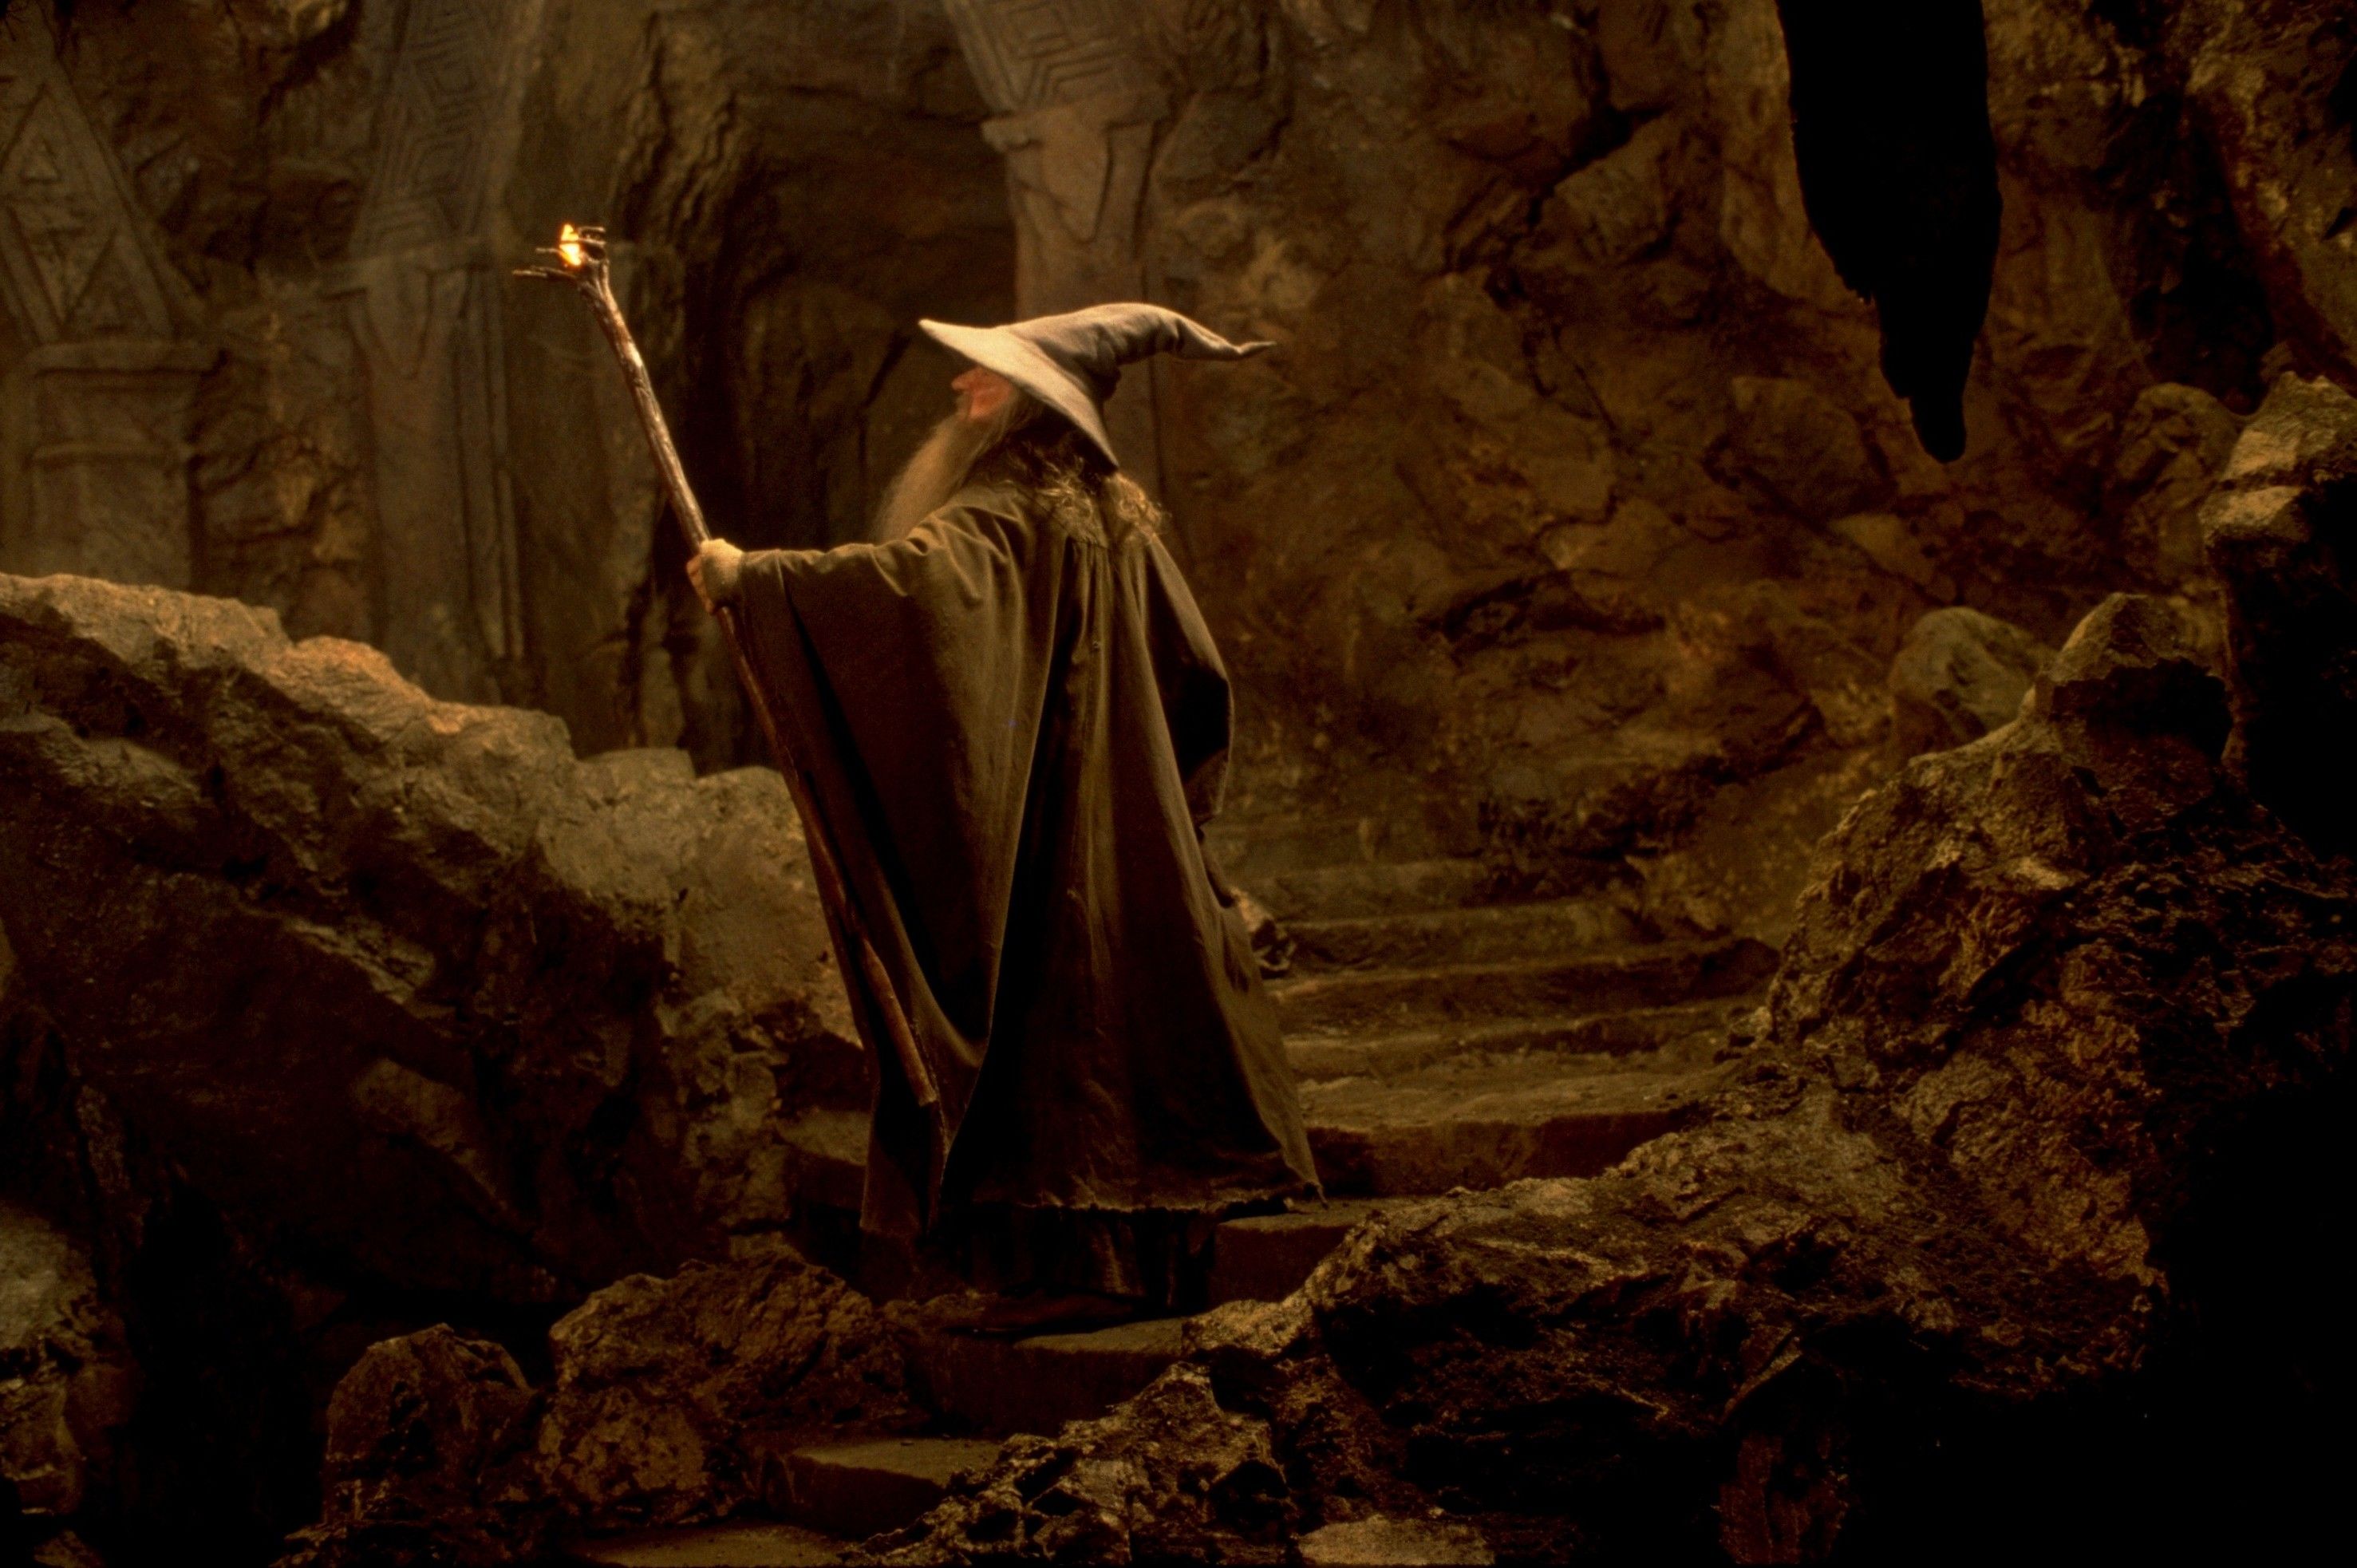 Gandalf leads the fellowship through the Mines of Moria